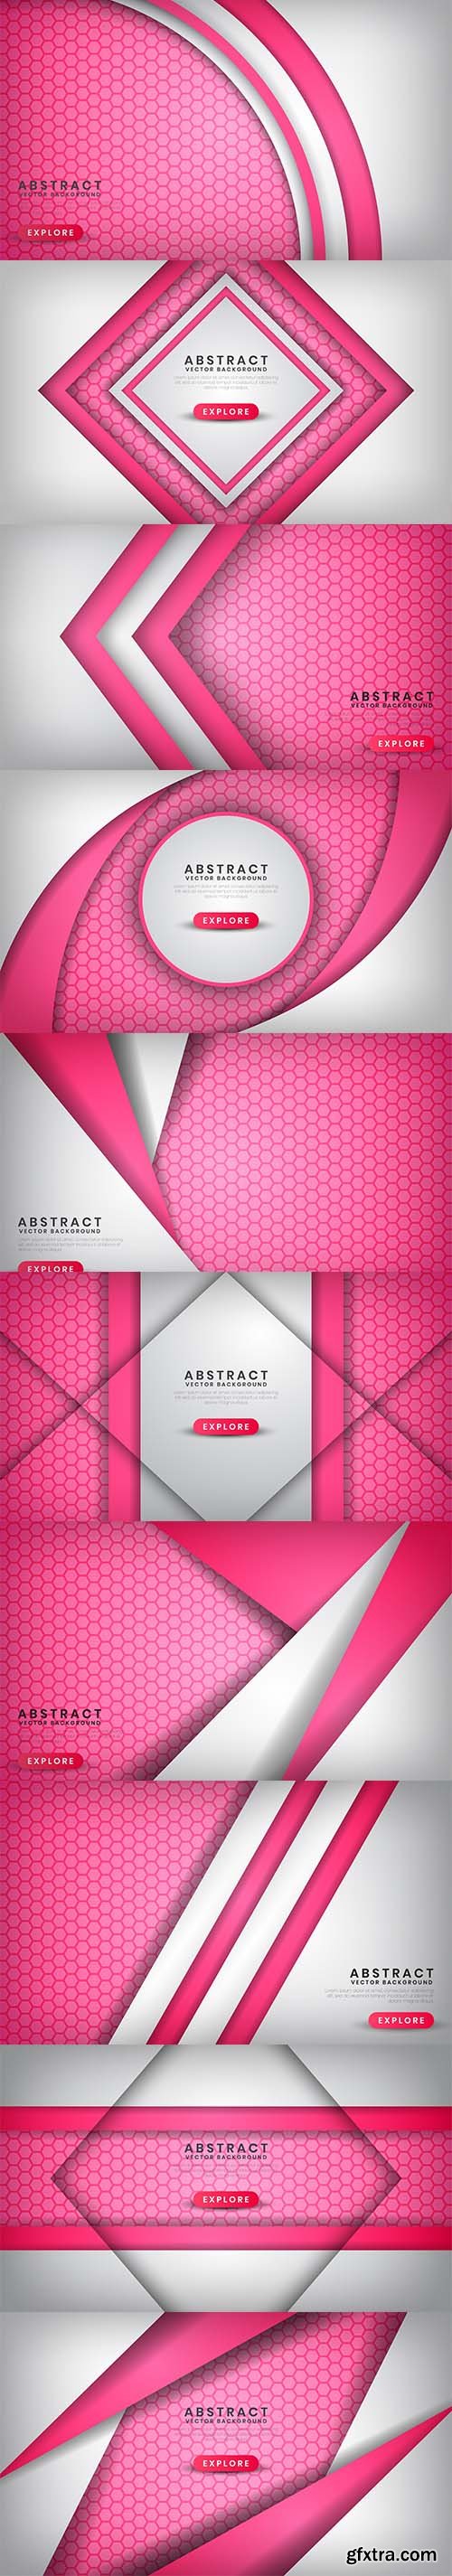 Abstract Luxury White Pink Background with Hexagon Patterns